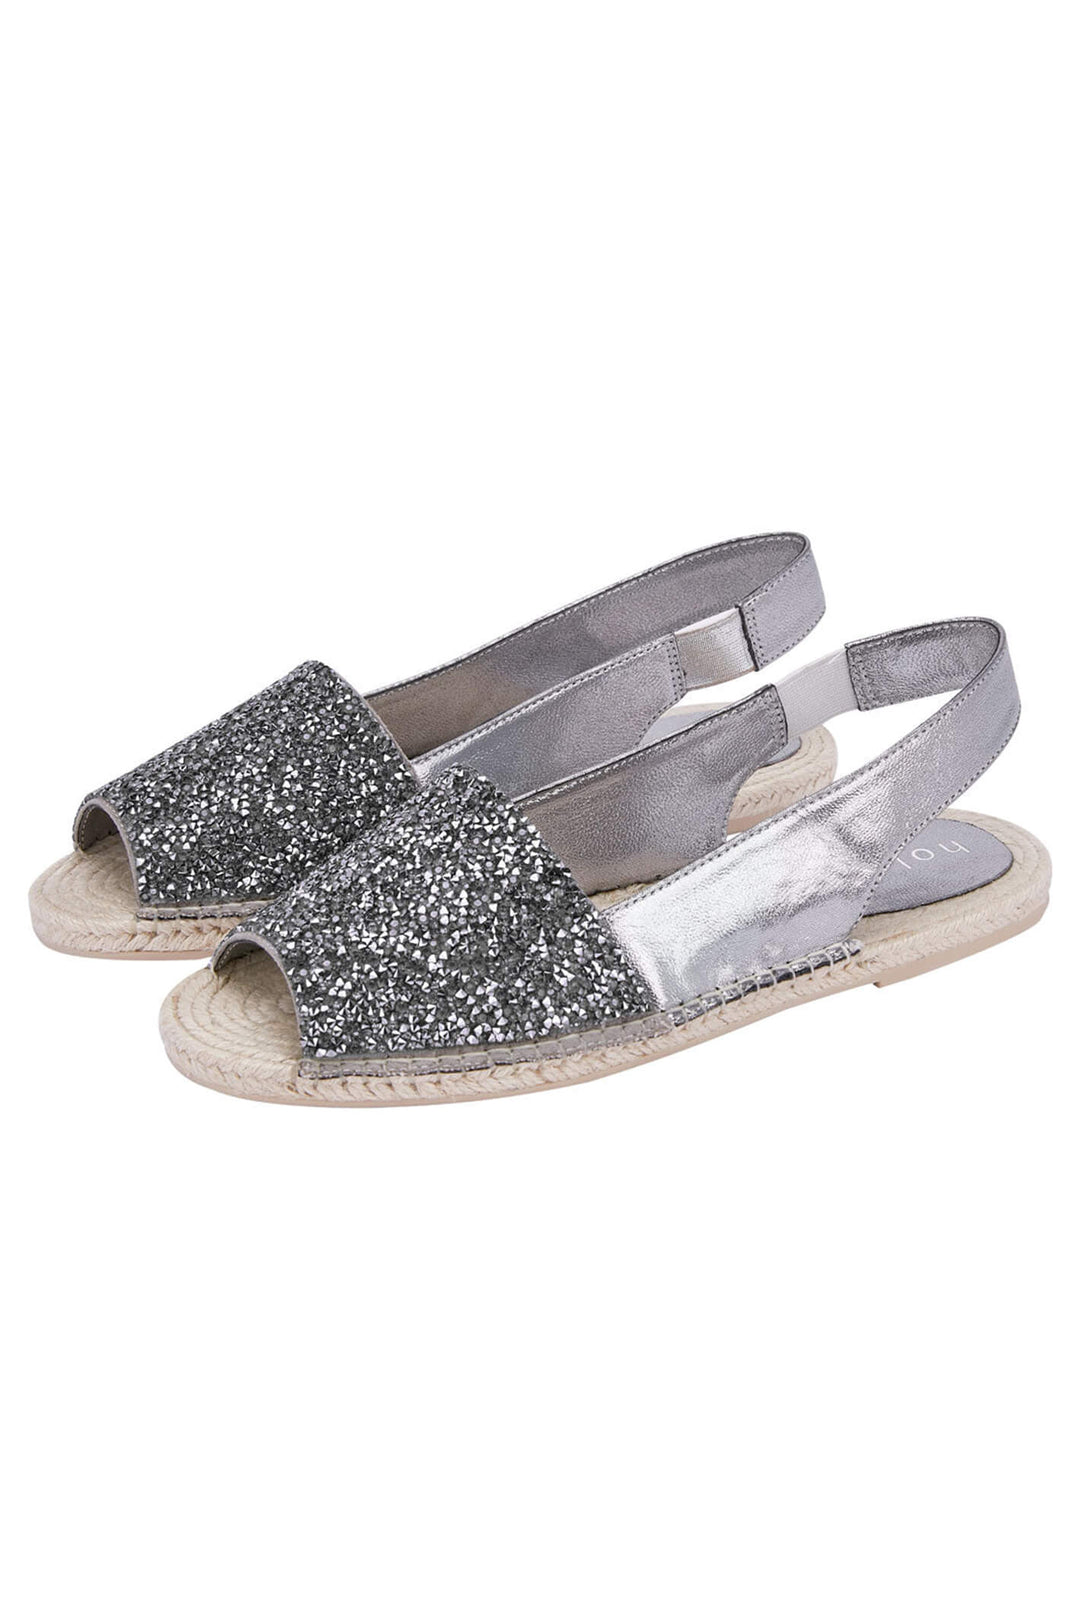 Holster Pewter Cora Sandals - Experience Boutique